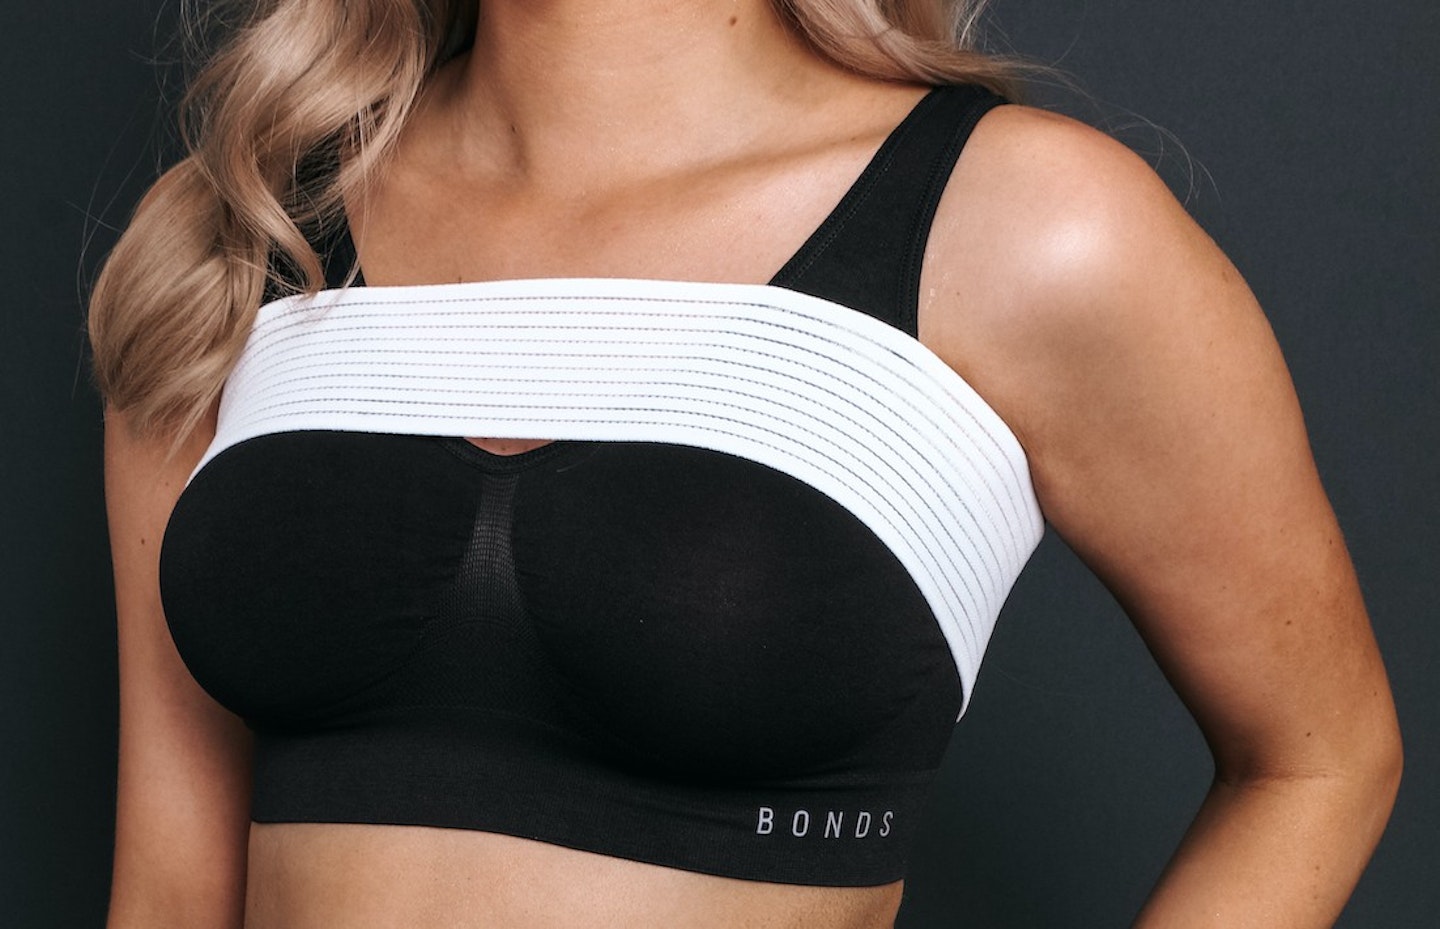 How Tight Should My Sports Bra Be After Breast Augmentation